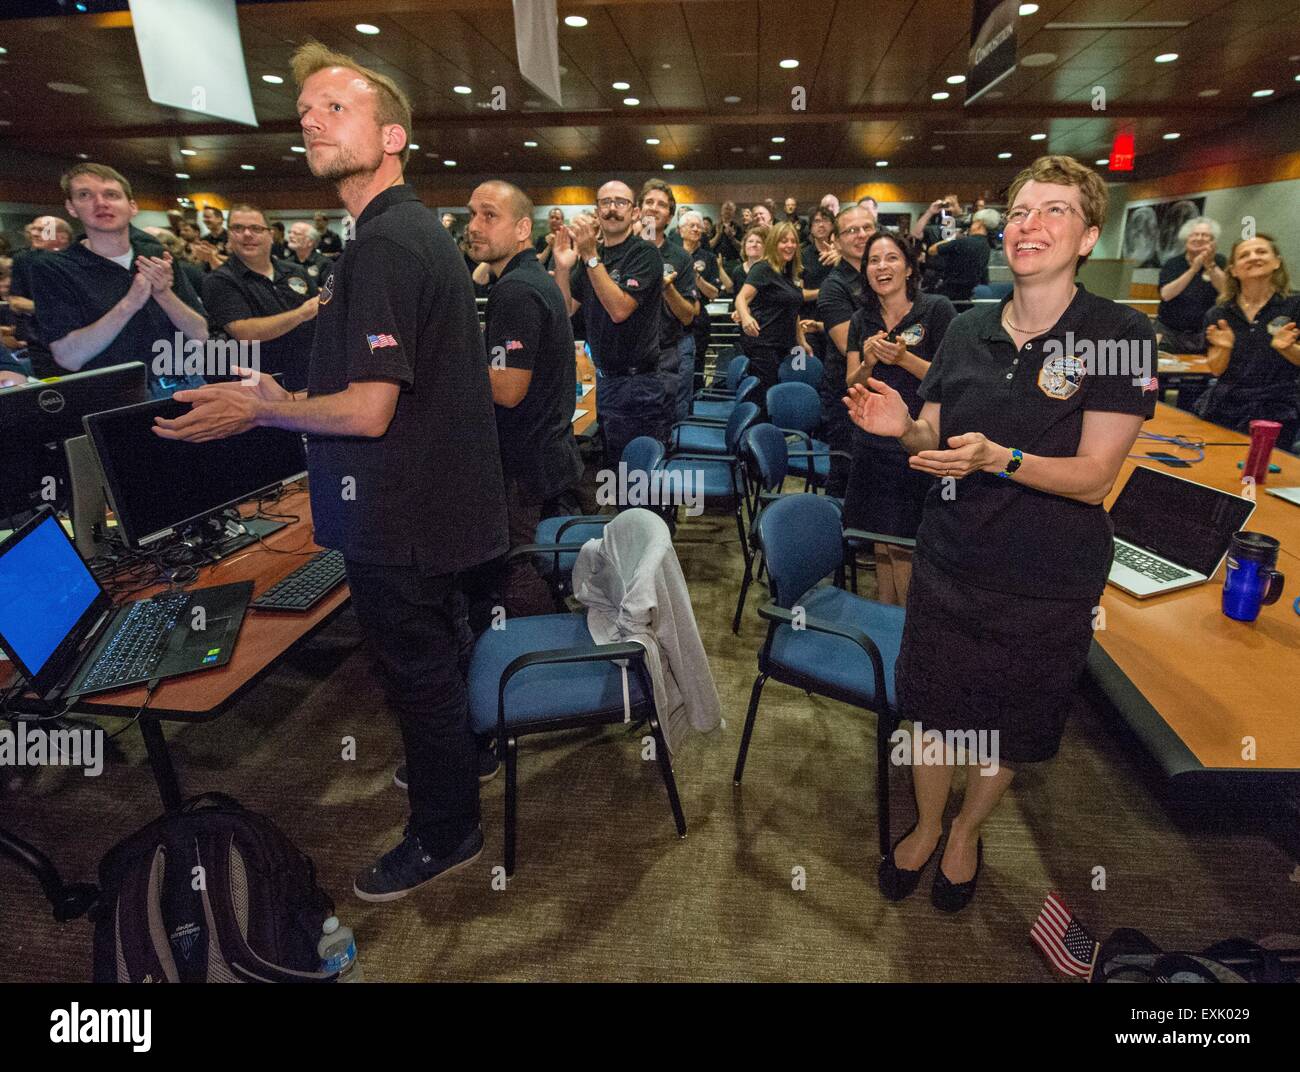 Laurel, Maryland, USA. 14th July, 2015. Members of the New Horizons science team applaud as they view the last and sharpest image of Pluto during the flyby of the space probe at the Johns Hopkins University Applied Physics Laboratory July 14, 2015 in Laurel, Maryland. Stock Photo